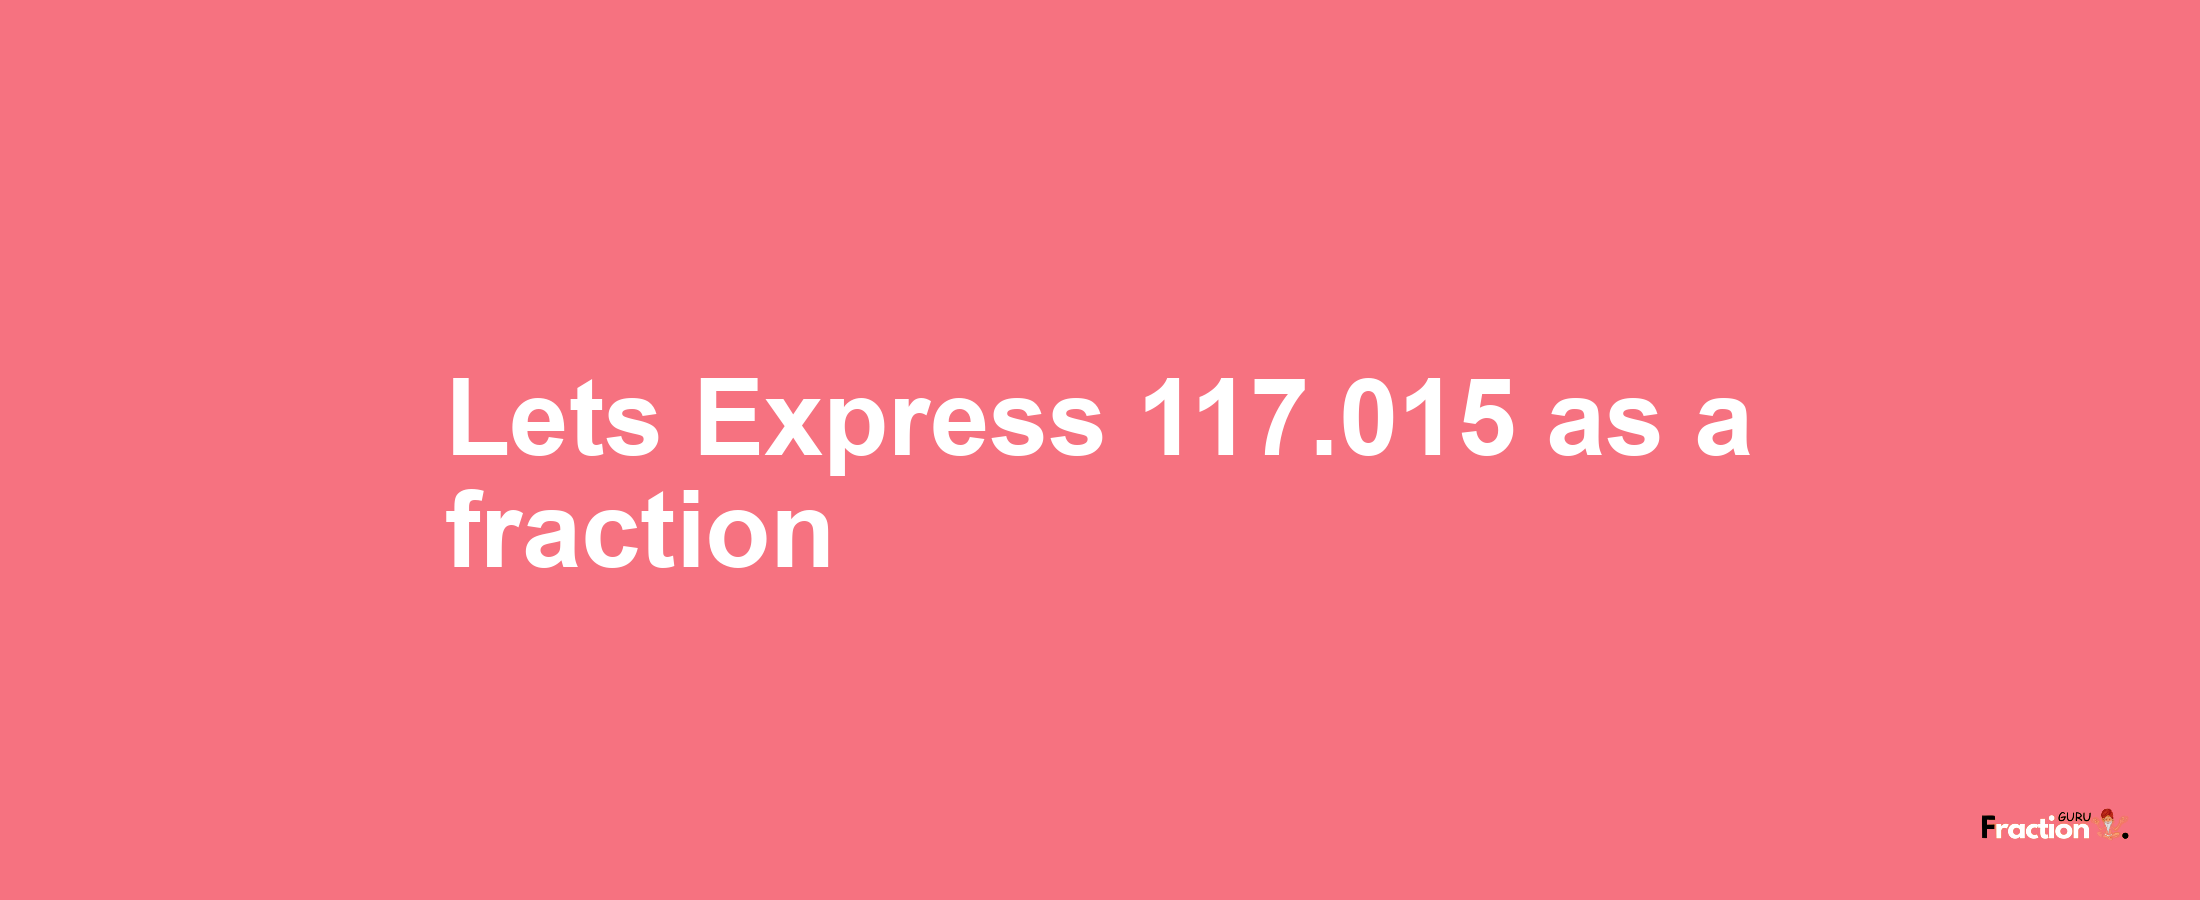 Lets Express 117.015 as afraction